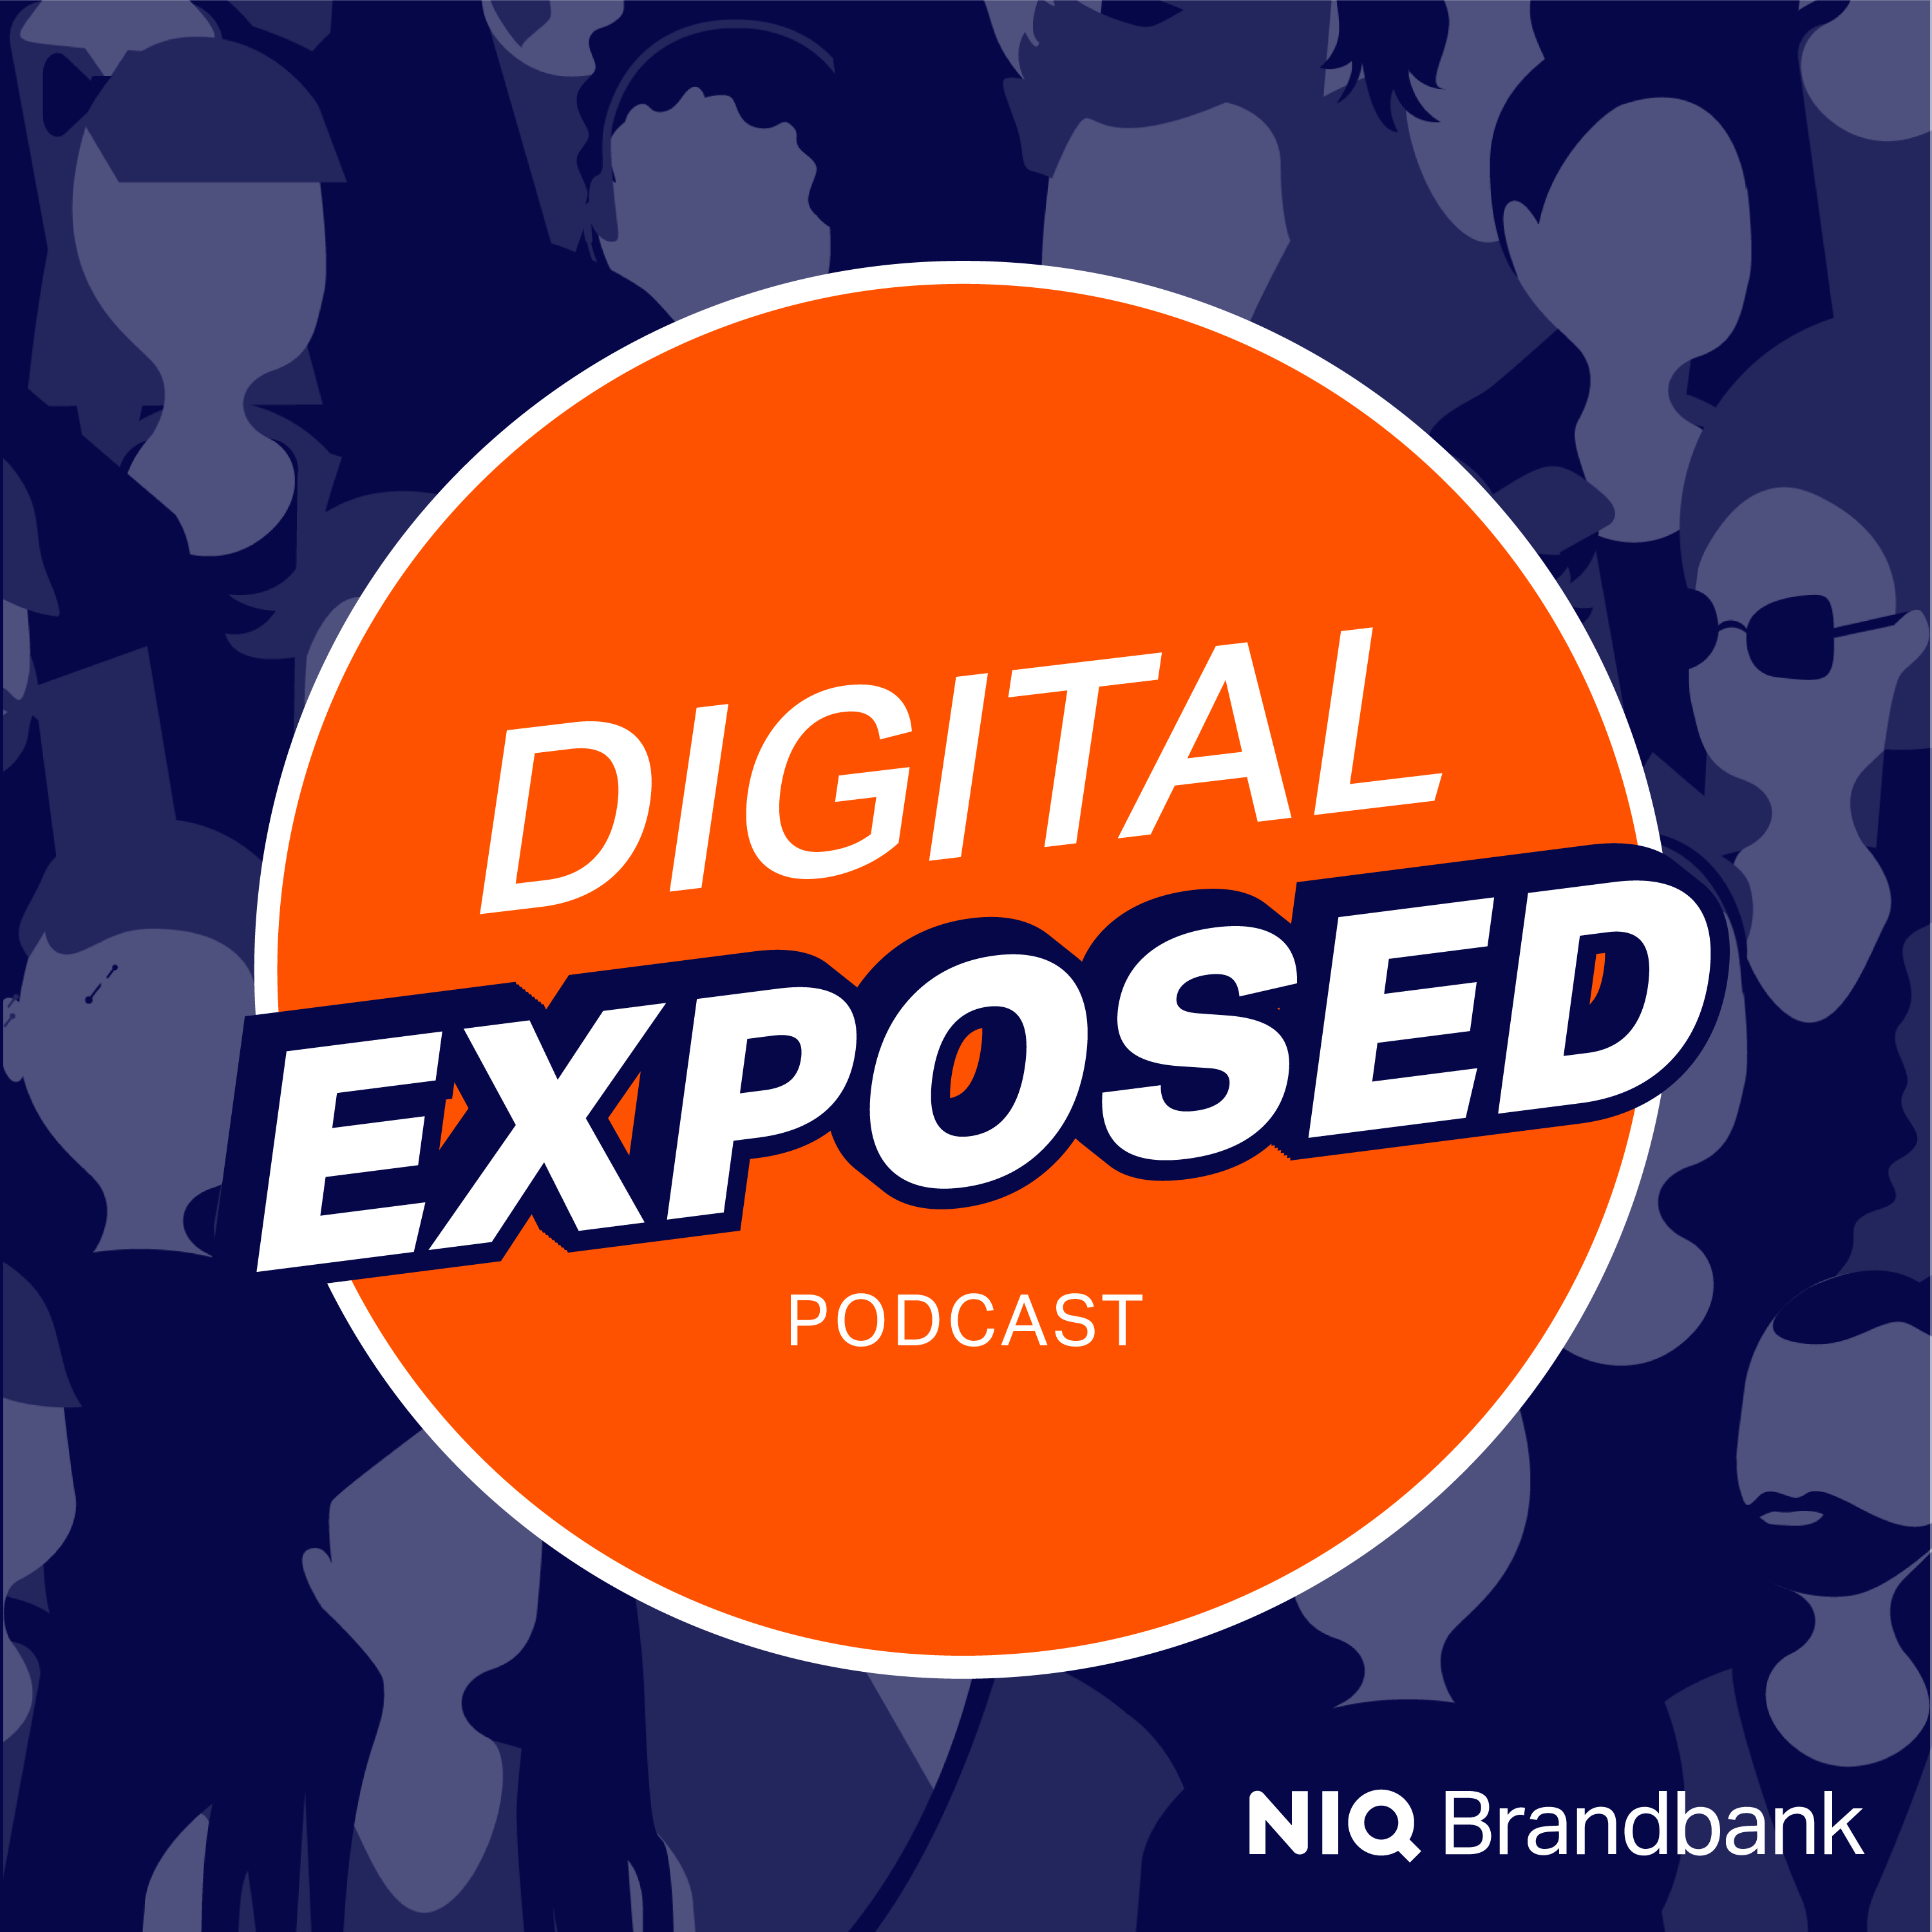 Introduction to the Digital Exposed Podcast